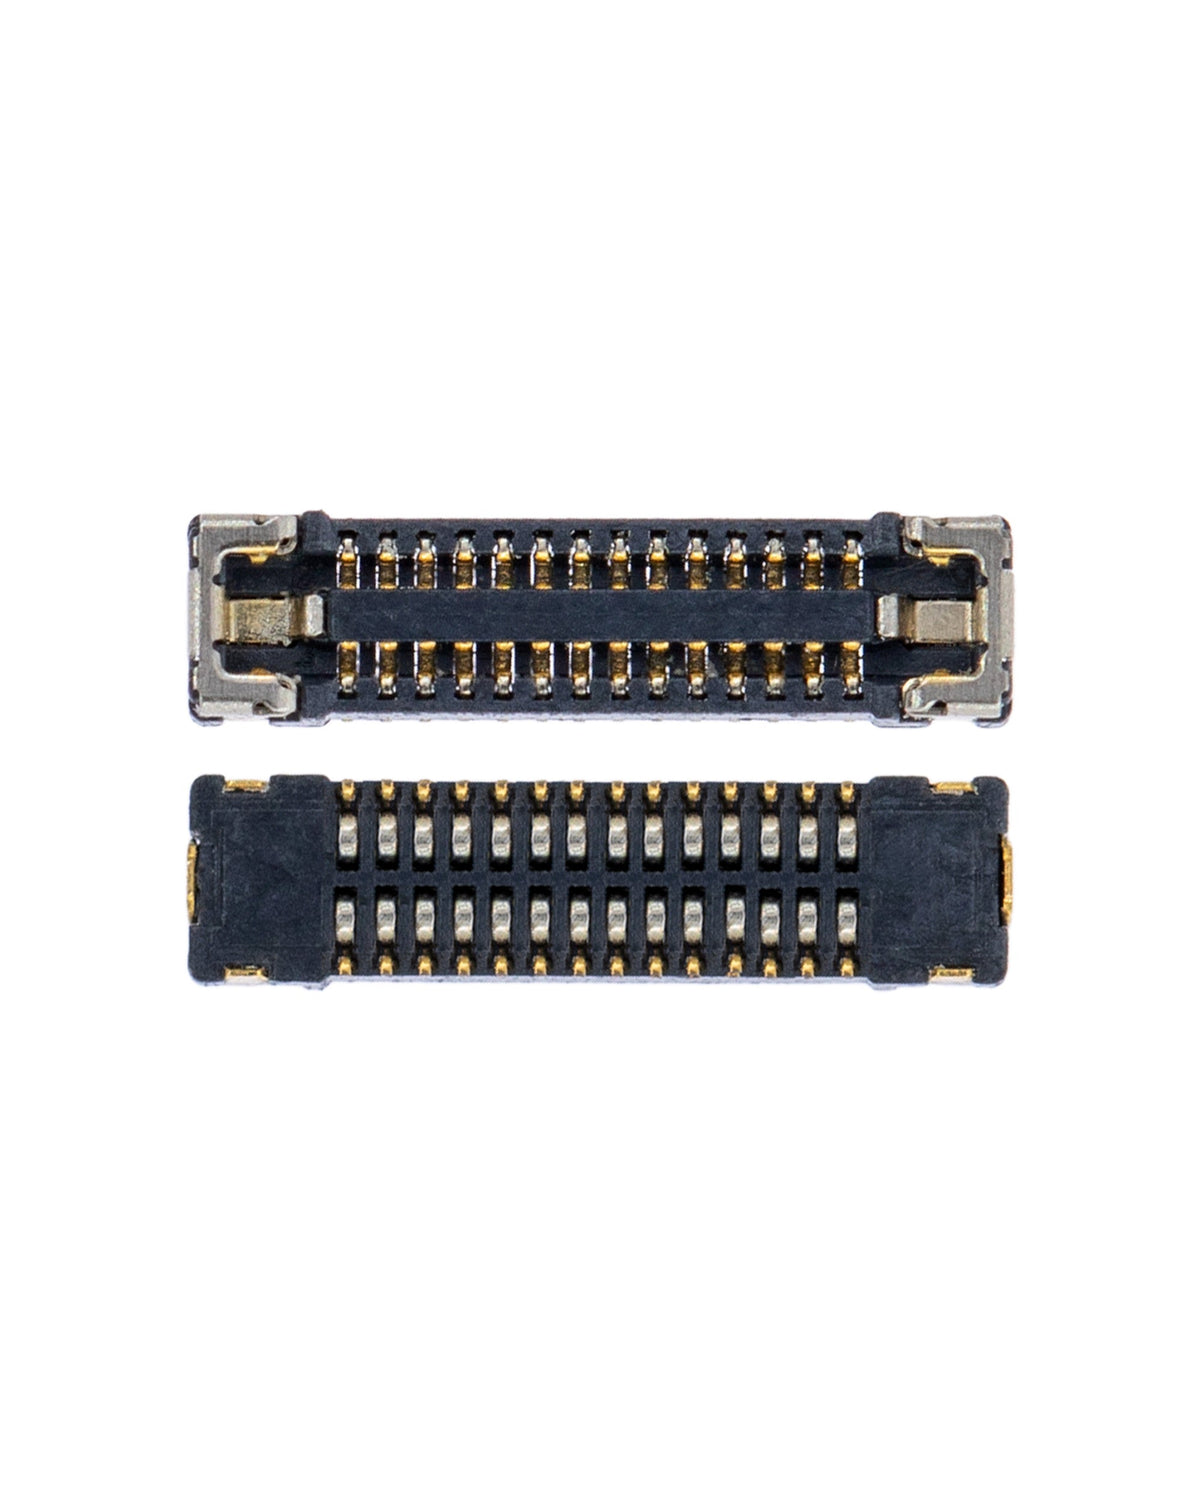 3D TOUCH FPC CONNECTOR COMPATIBLE WITH IPHONE X / XS / XS MAX (J5800: 28 PIN)